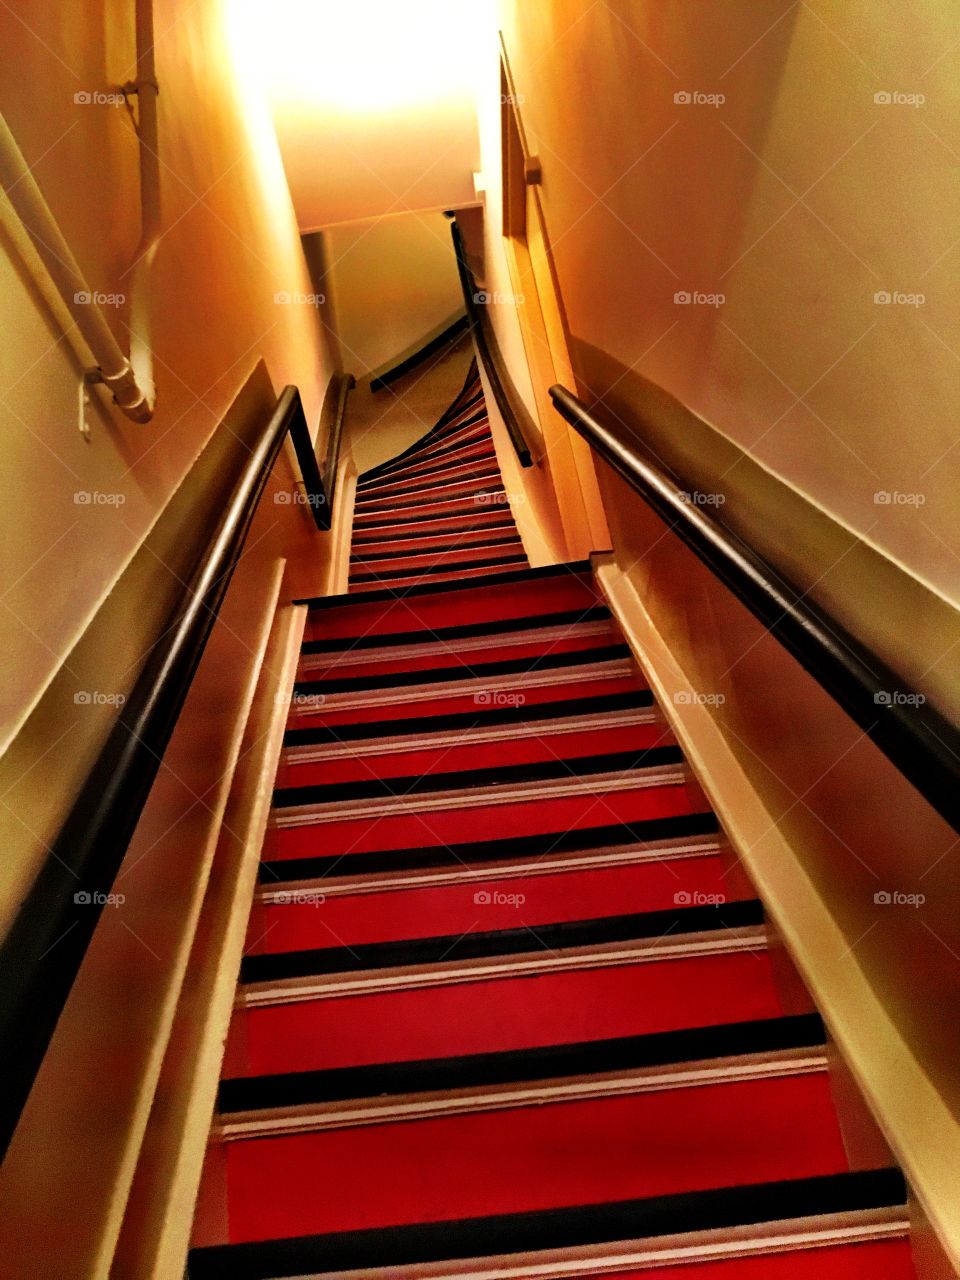 Up the red staircase 